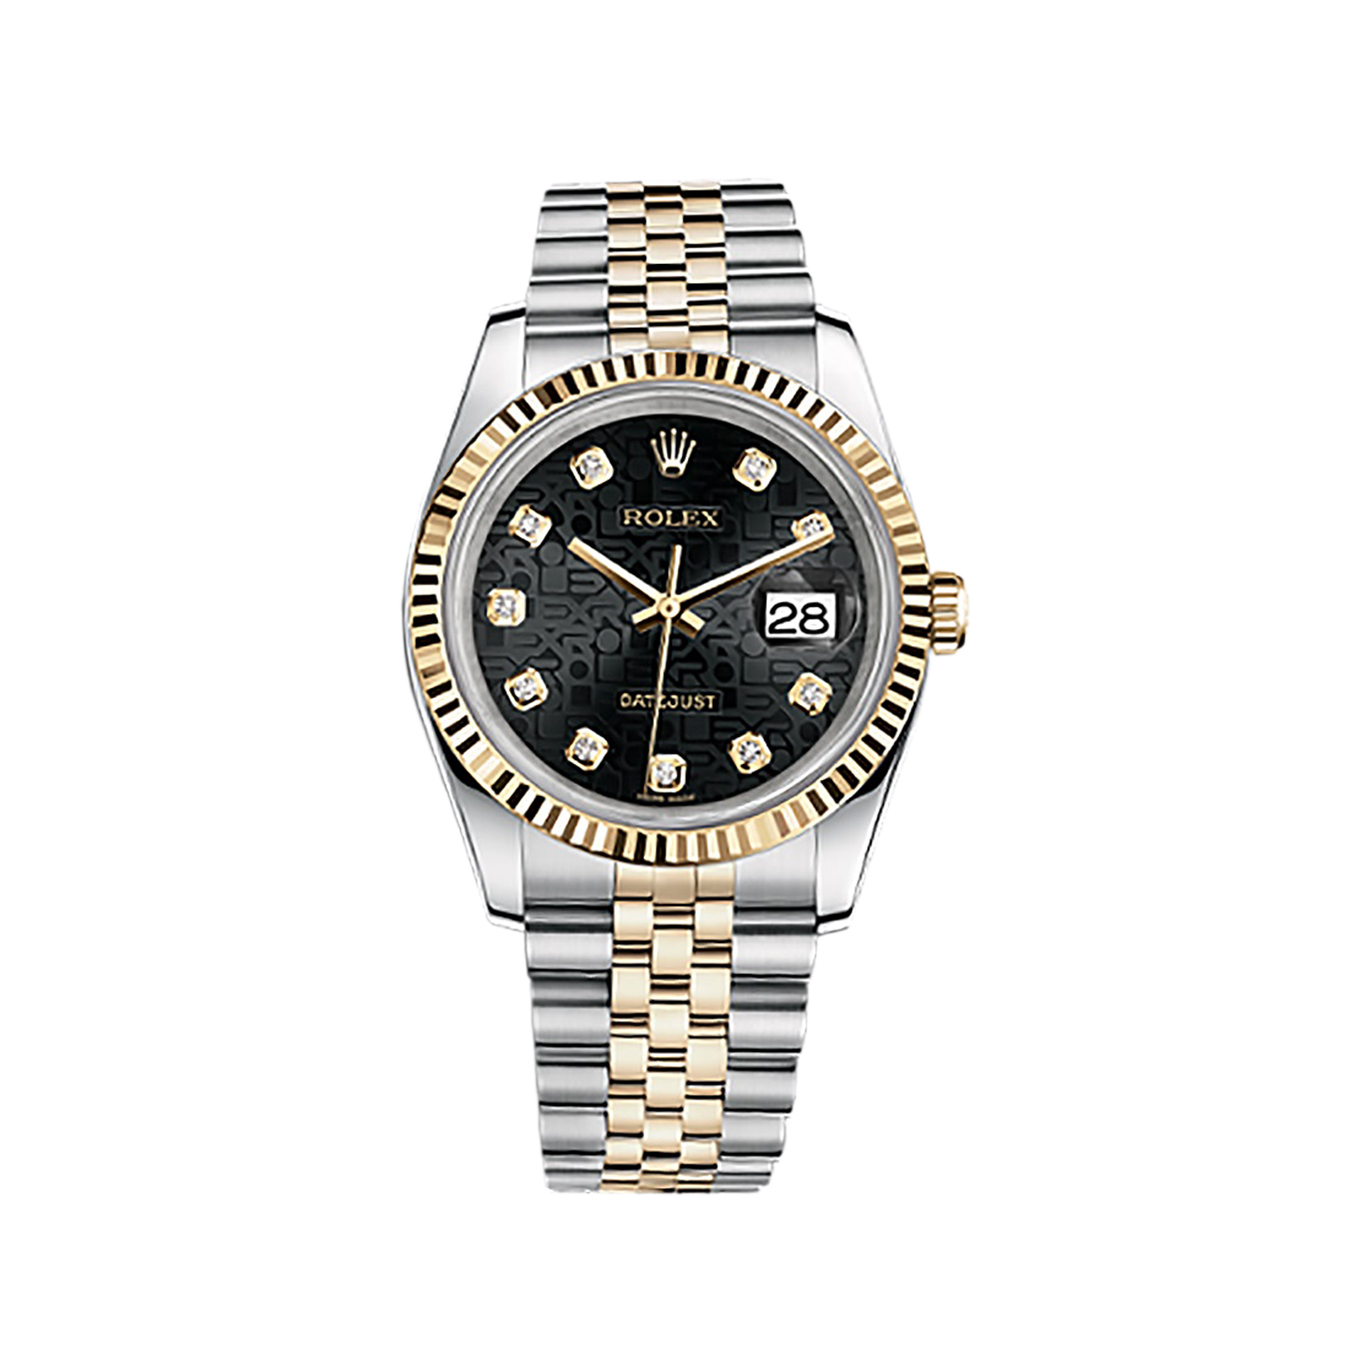 Datejust 36 116233 Gold & Stainless Steel Watch (Black Jubilee Design Set with Diamonds)